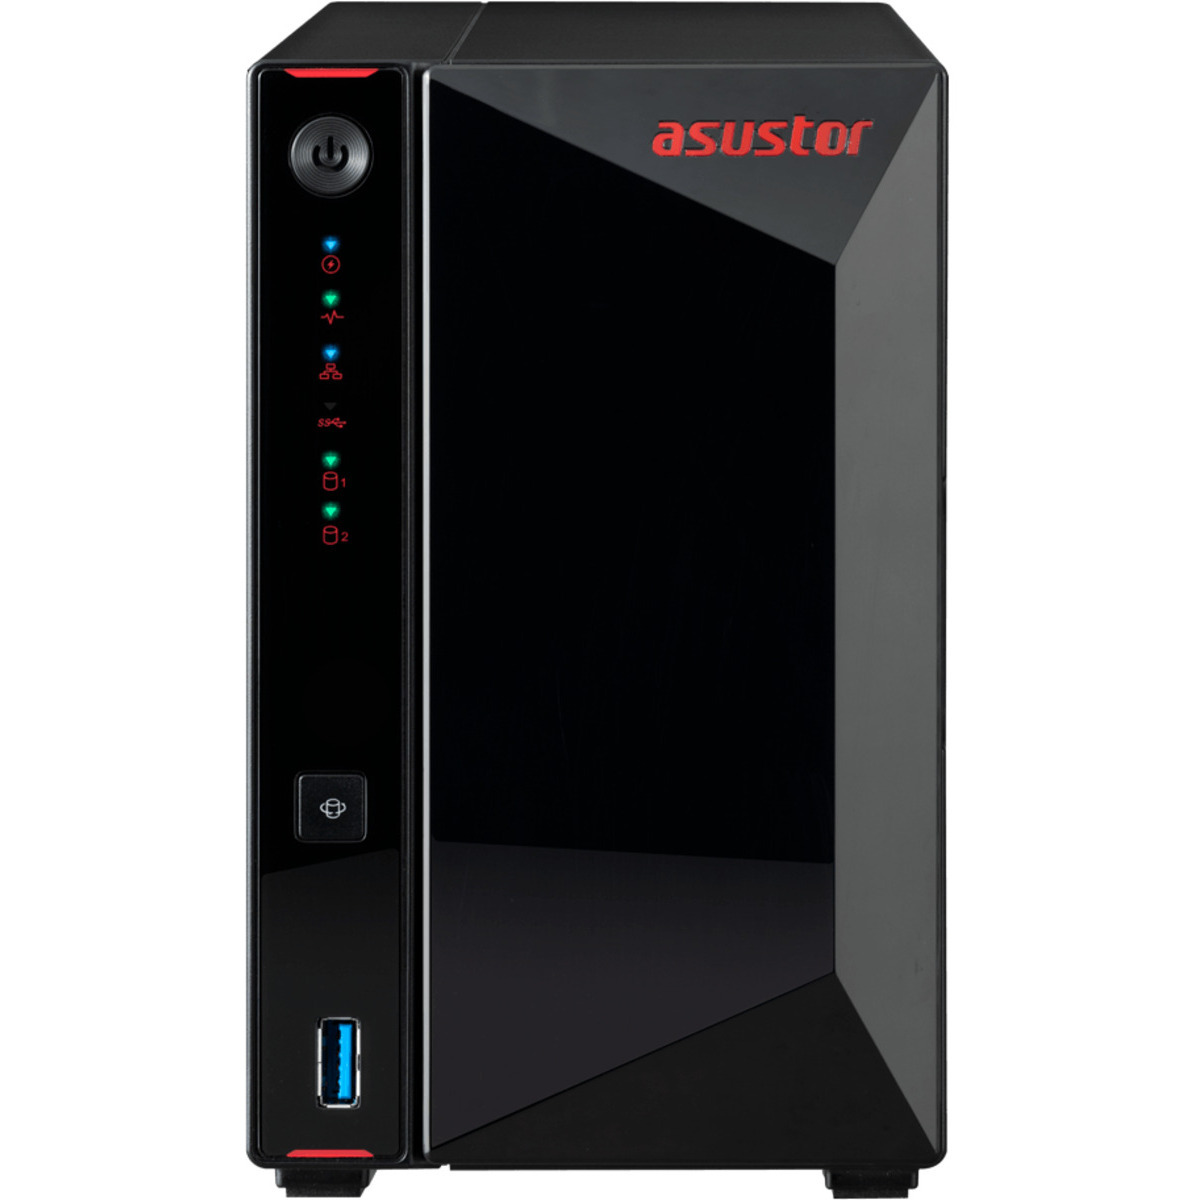 buy $652 ASUSTOR AS5202T Nimbustor 16tb Desktop NAS - Network Attached Storage Device 2x8000gb Seagate BarraCuda ST8000DM004 3.5 5400rpm SATA 6Gb/s HDD CONSUMER Class Drives Installed - Burn-In Tested - FREE RAM UPGRADE - nas headquarters buy network attached storage server device das new raid-5 free shipping usa AS5202T Nimbustor